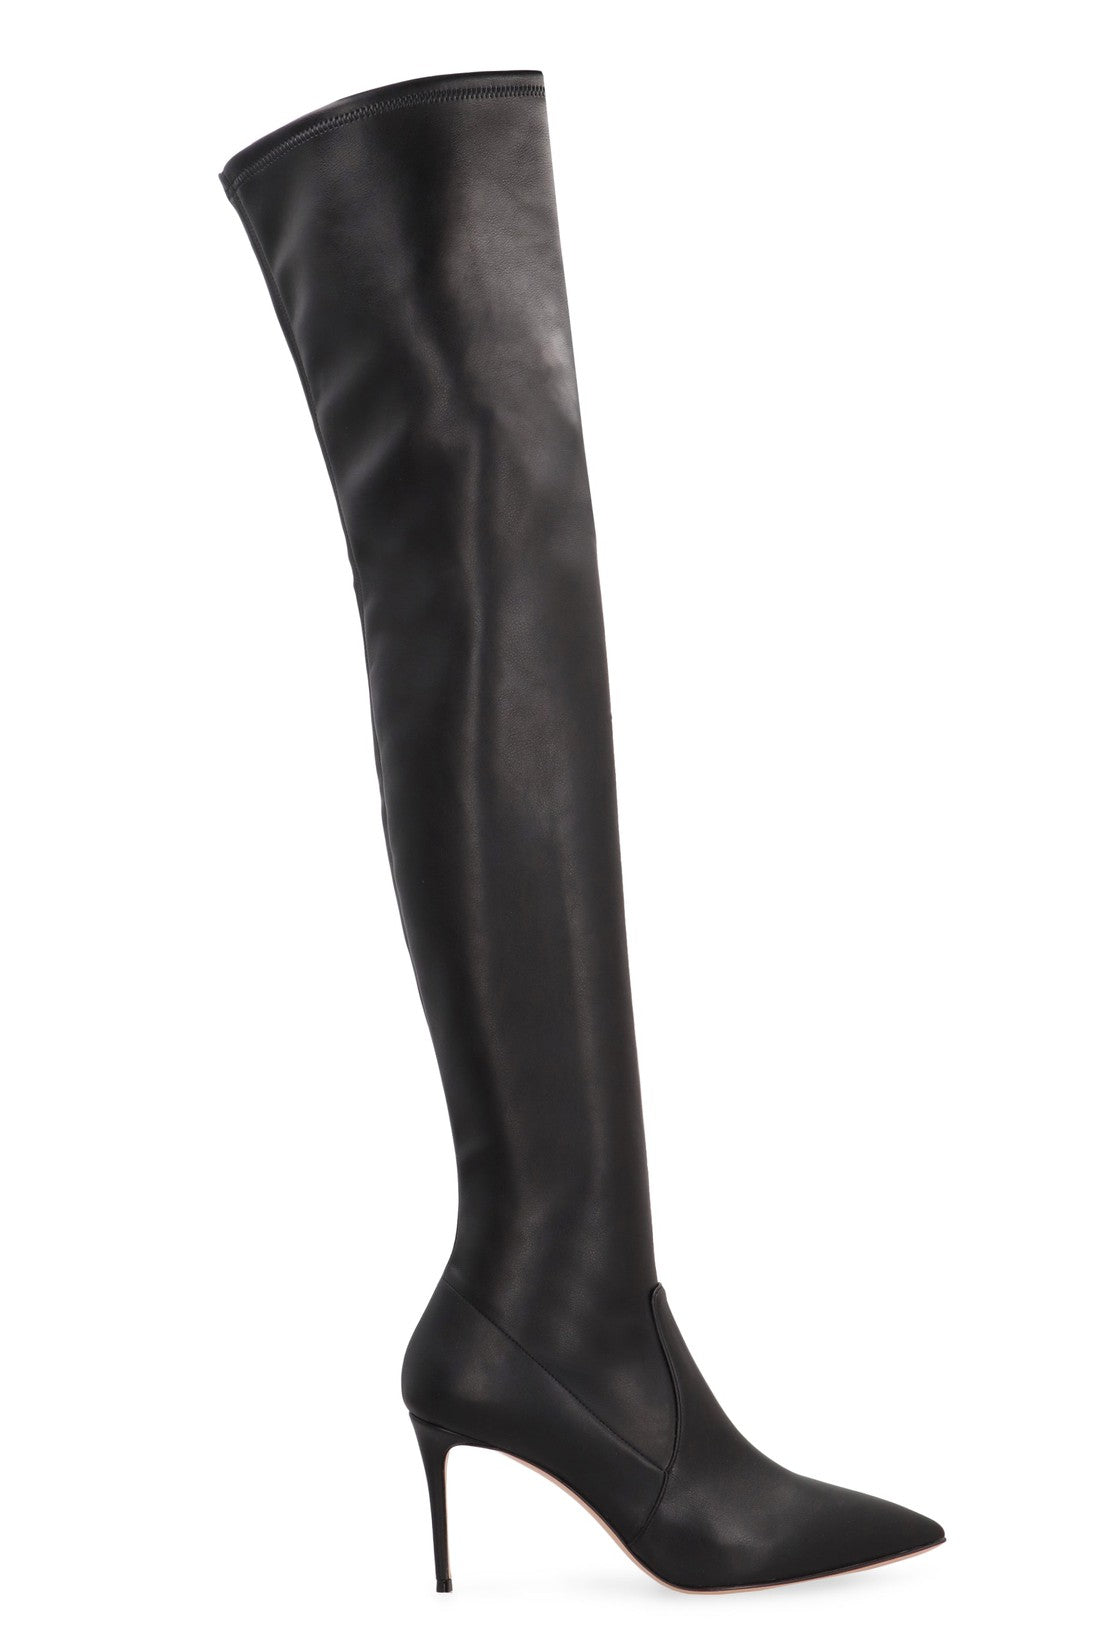 Casadei-OUTLET-SALE-Julia over-the-knee boots-ARCHIVIST